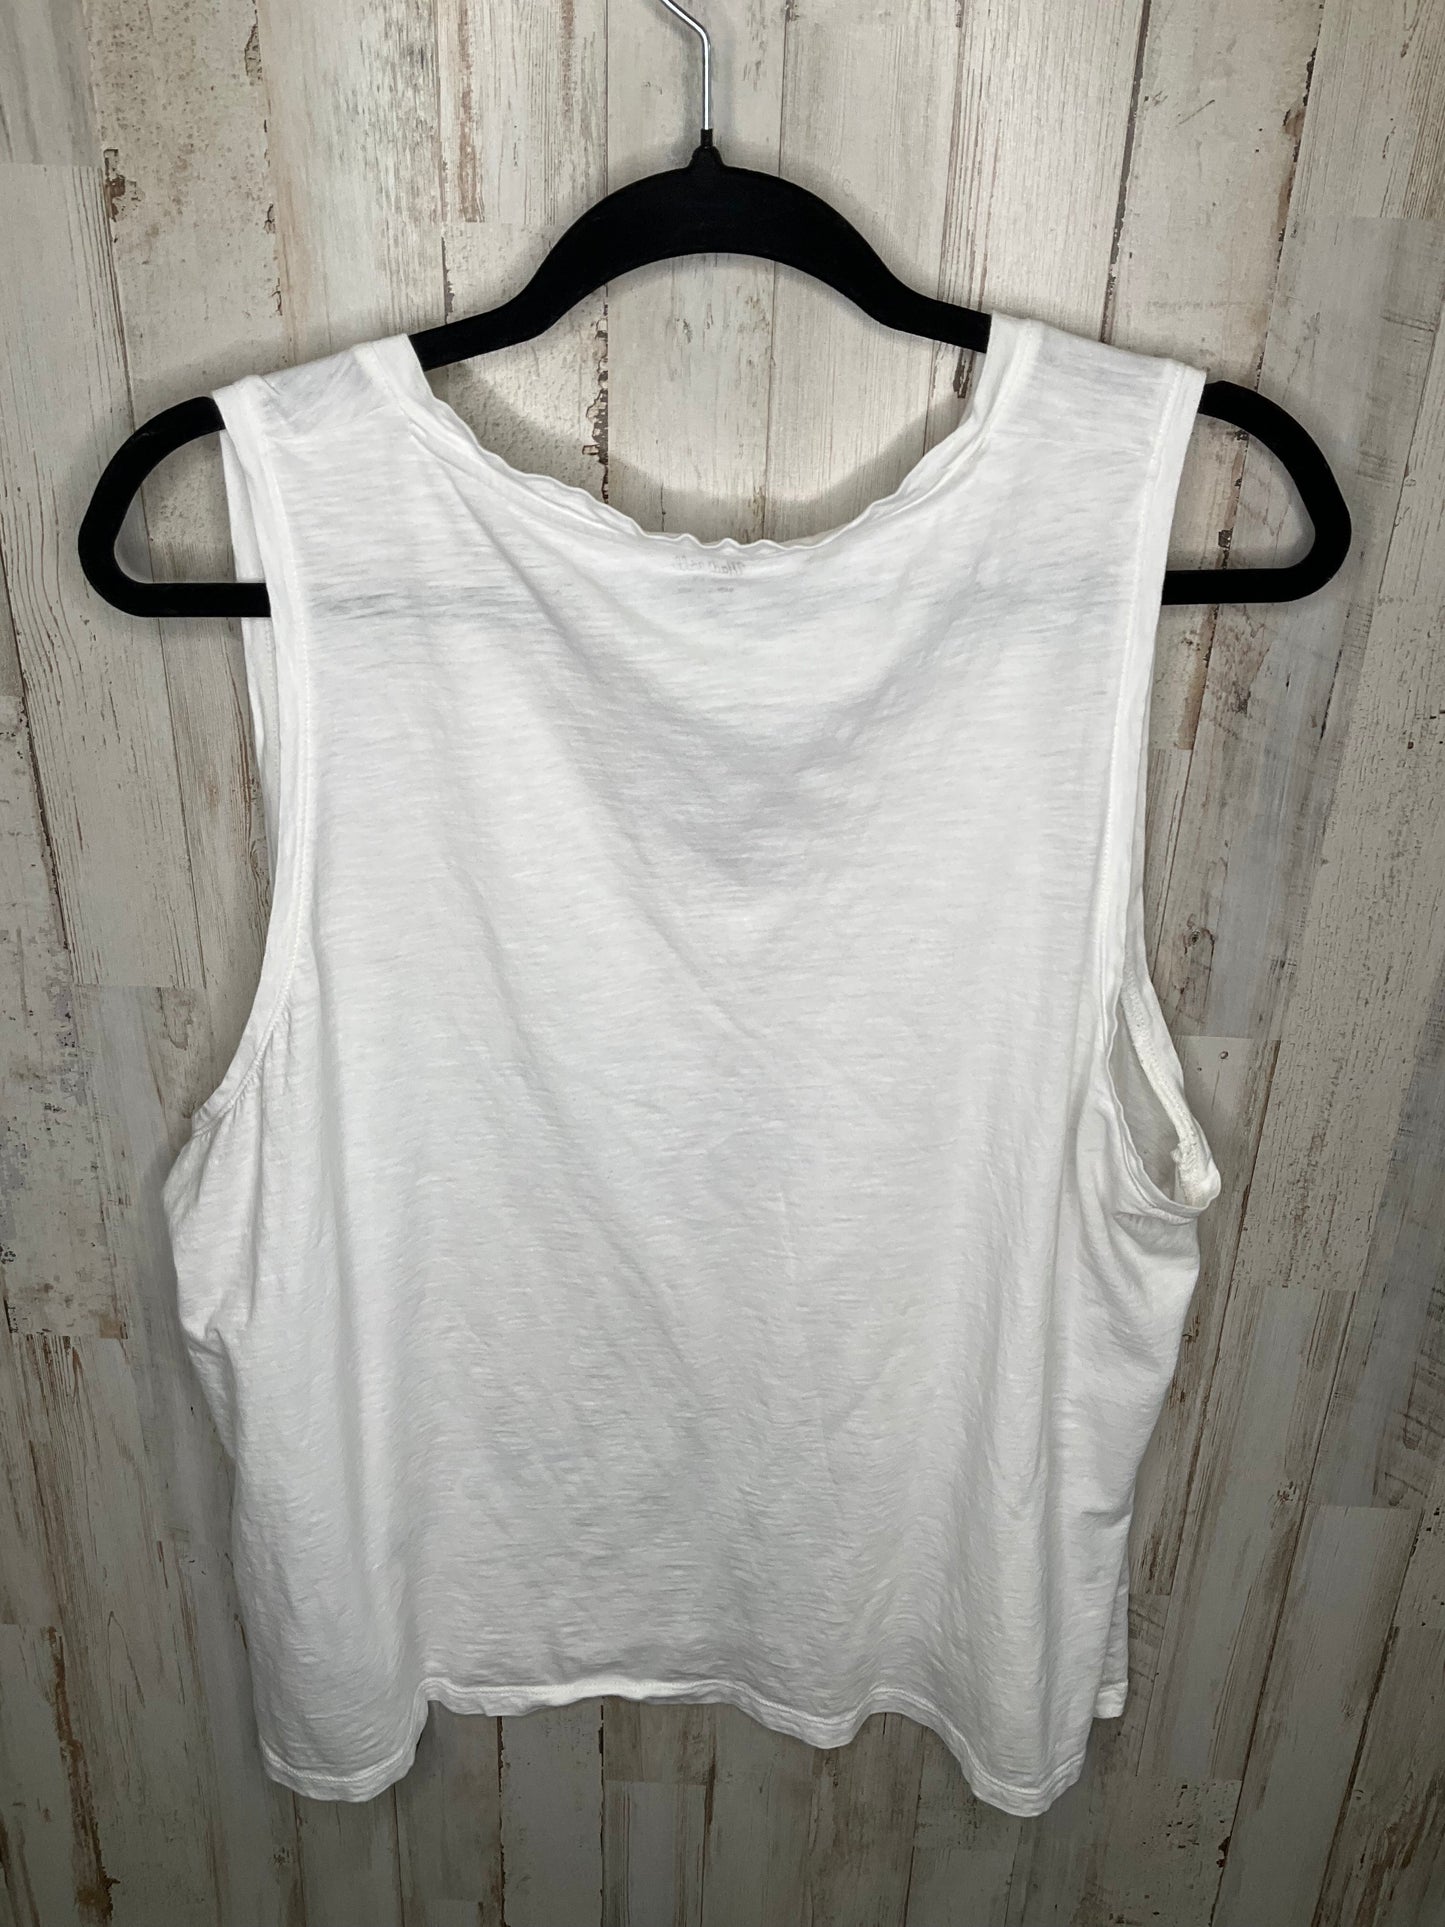 White Tank Top Madewell, Size 3x